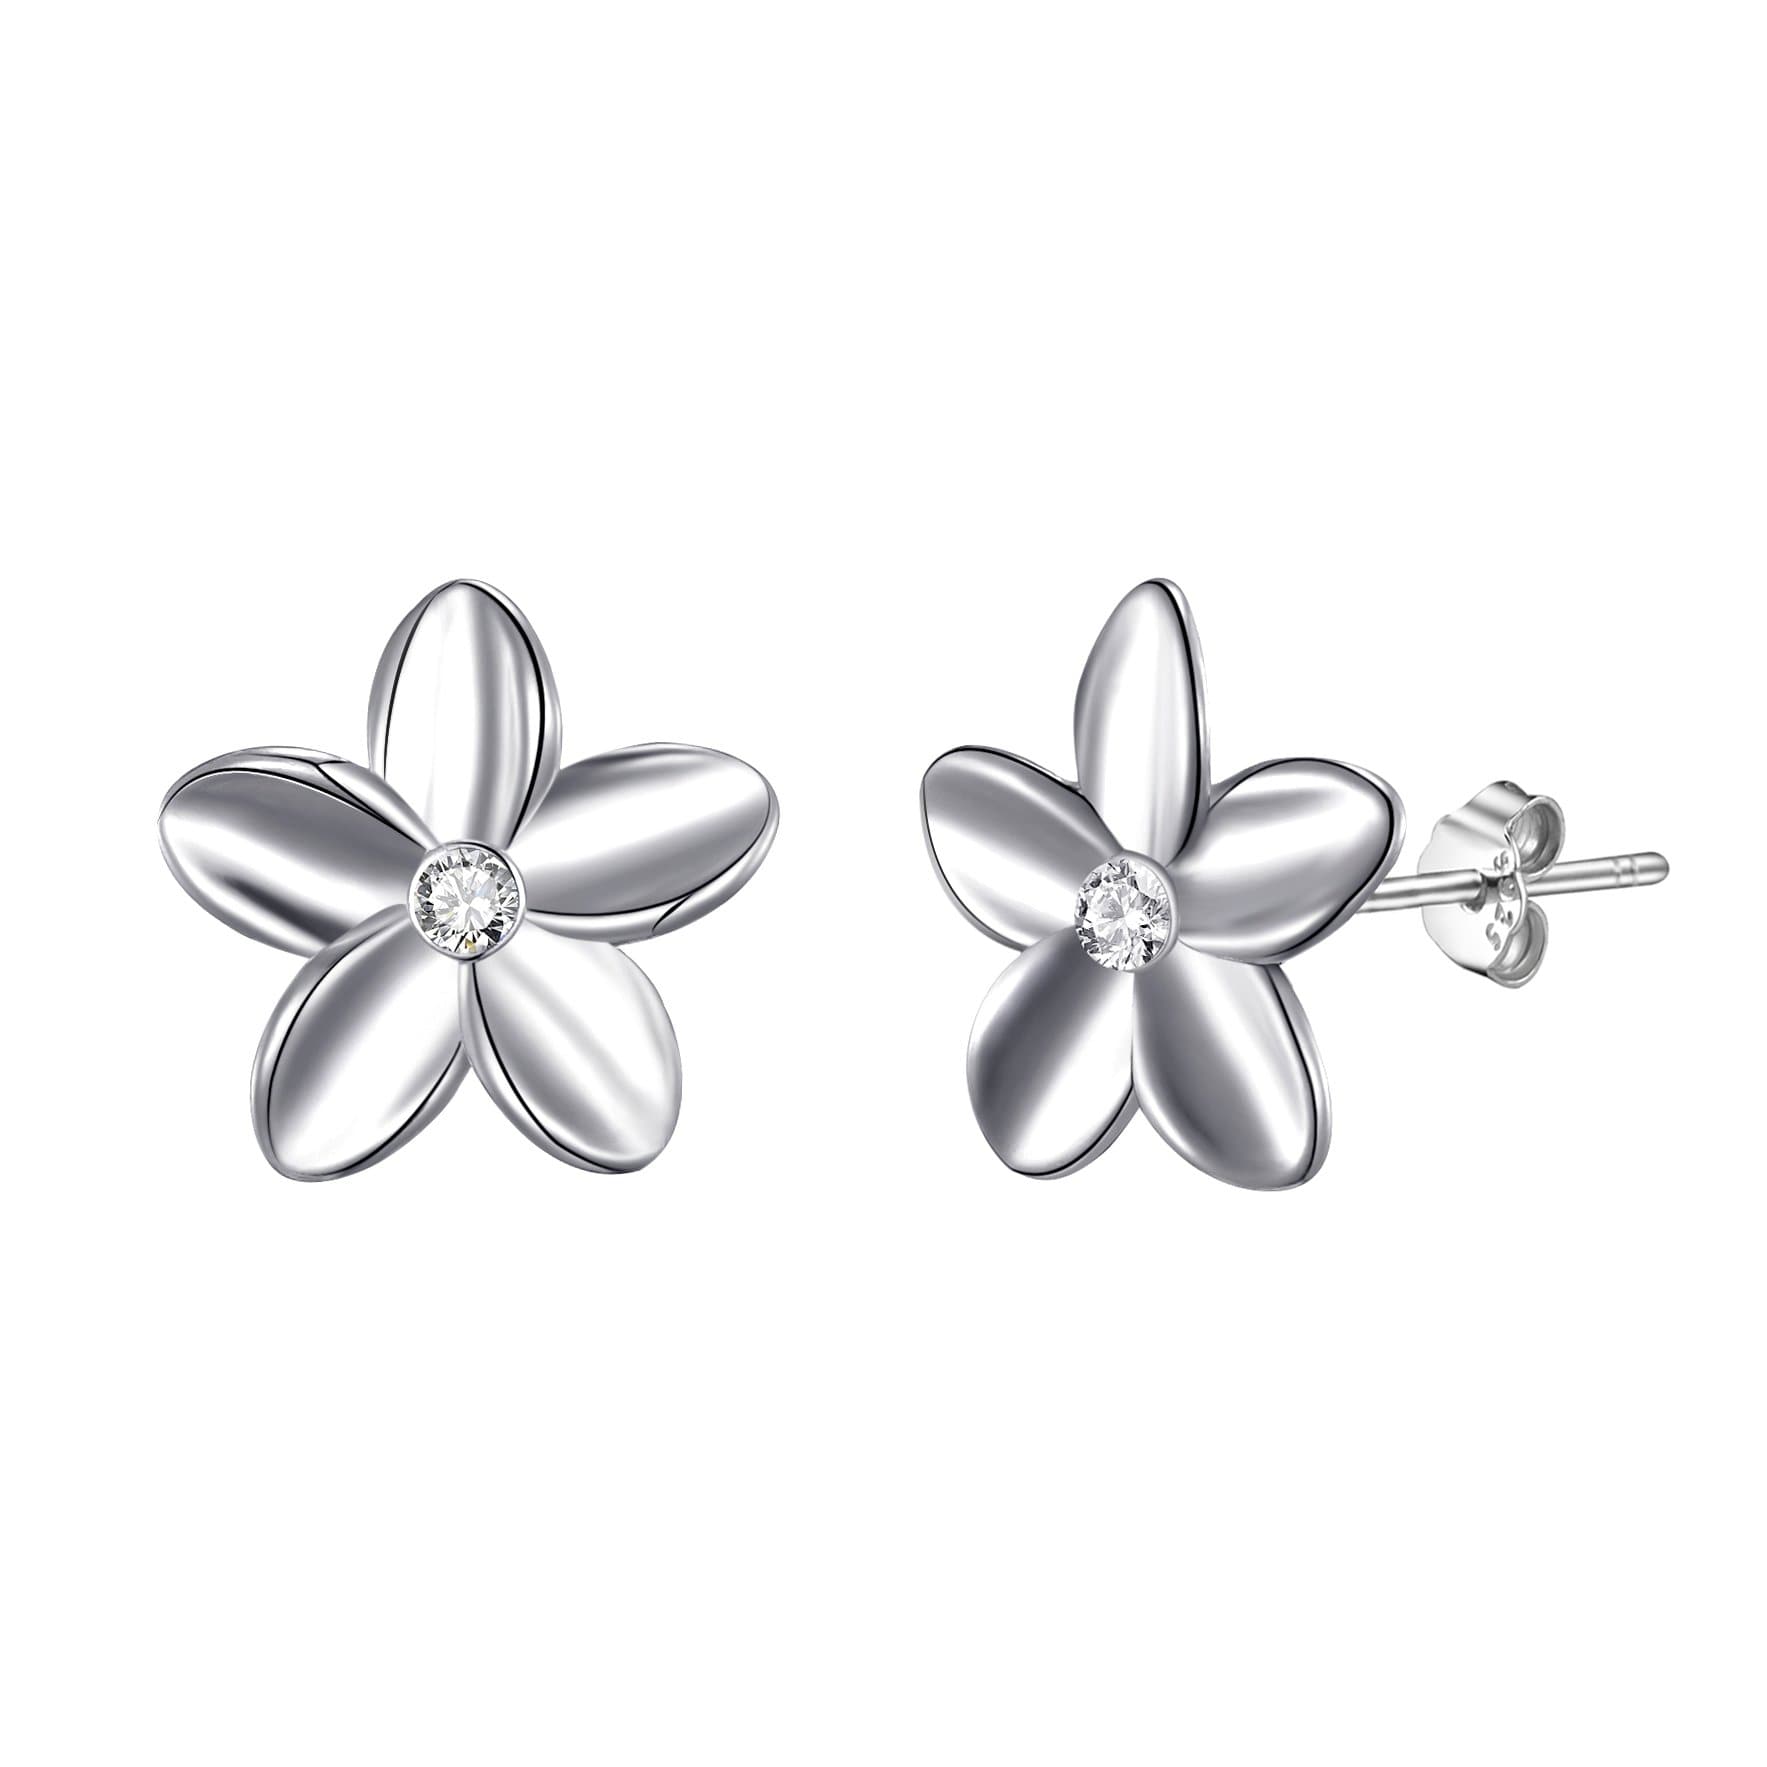 Sterling Silver Flower Earrings Created with Zircondia® Crystals